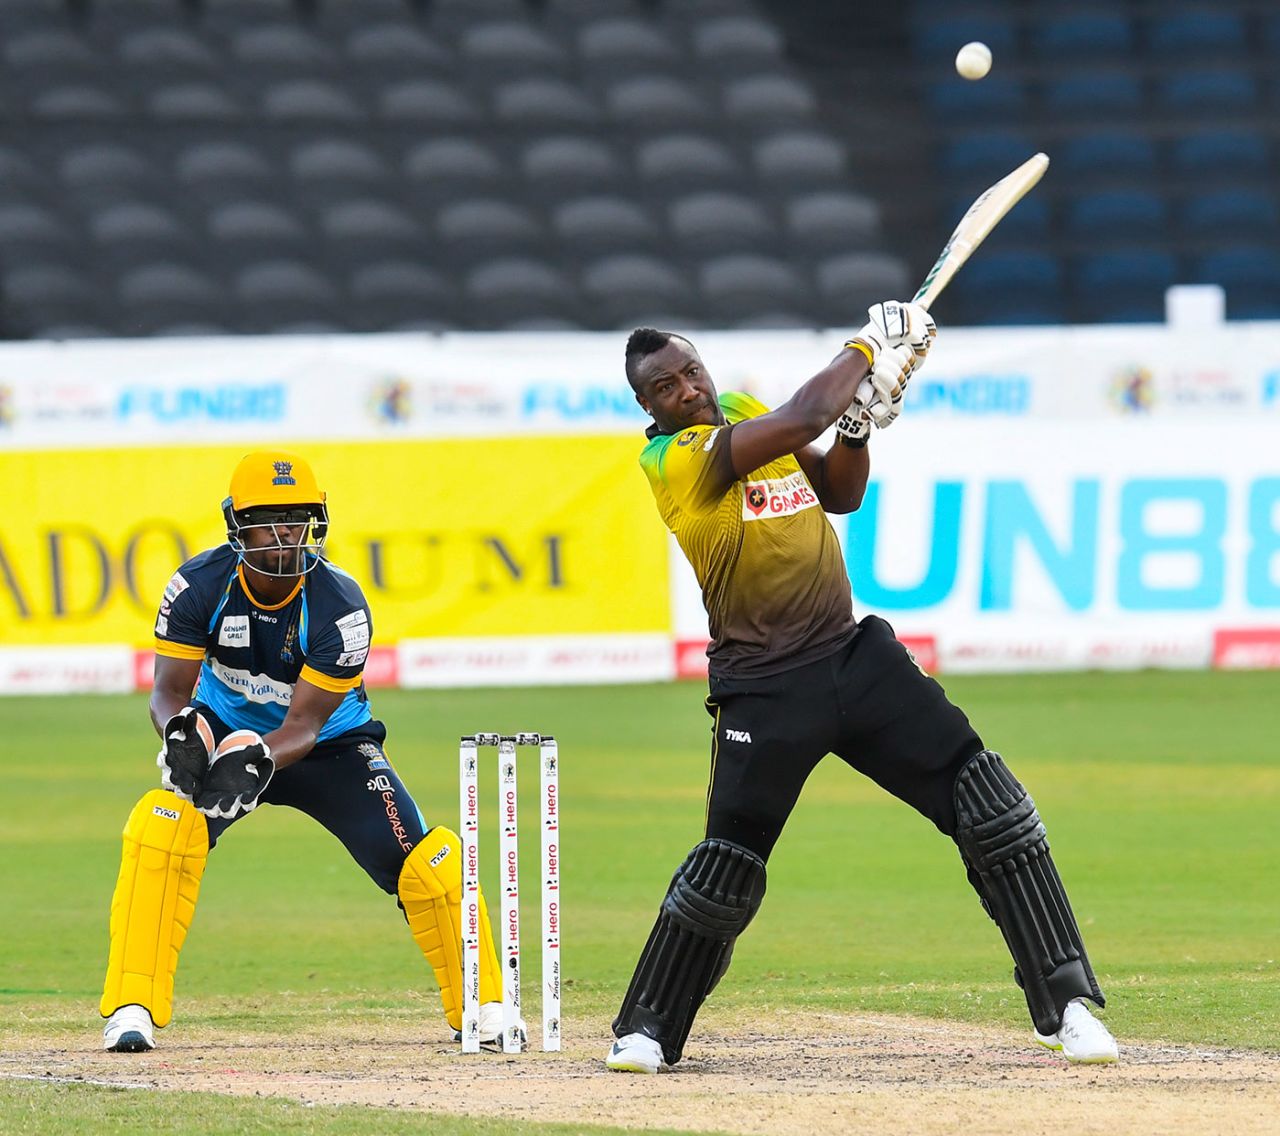 Andre Russell heaves the ball away, Jamaica Tallawahs v Barbados Tridents, CPL 2020, Trinidad, September 5, 2020